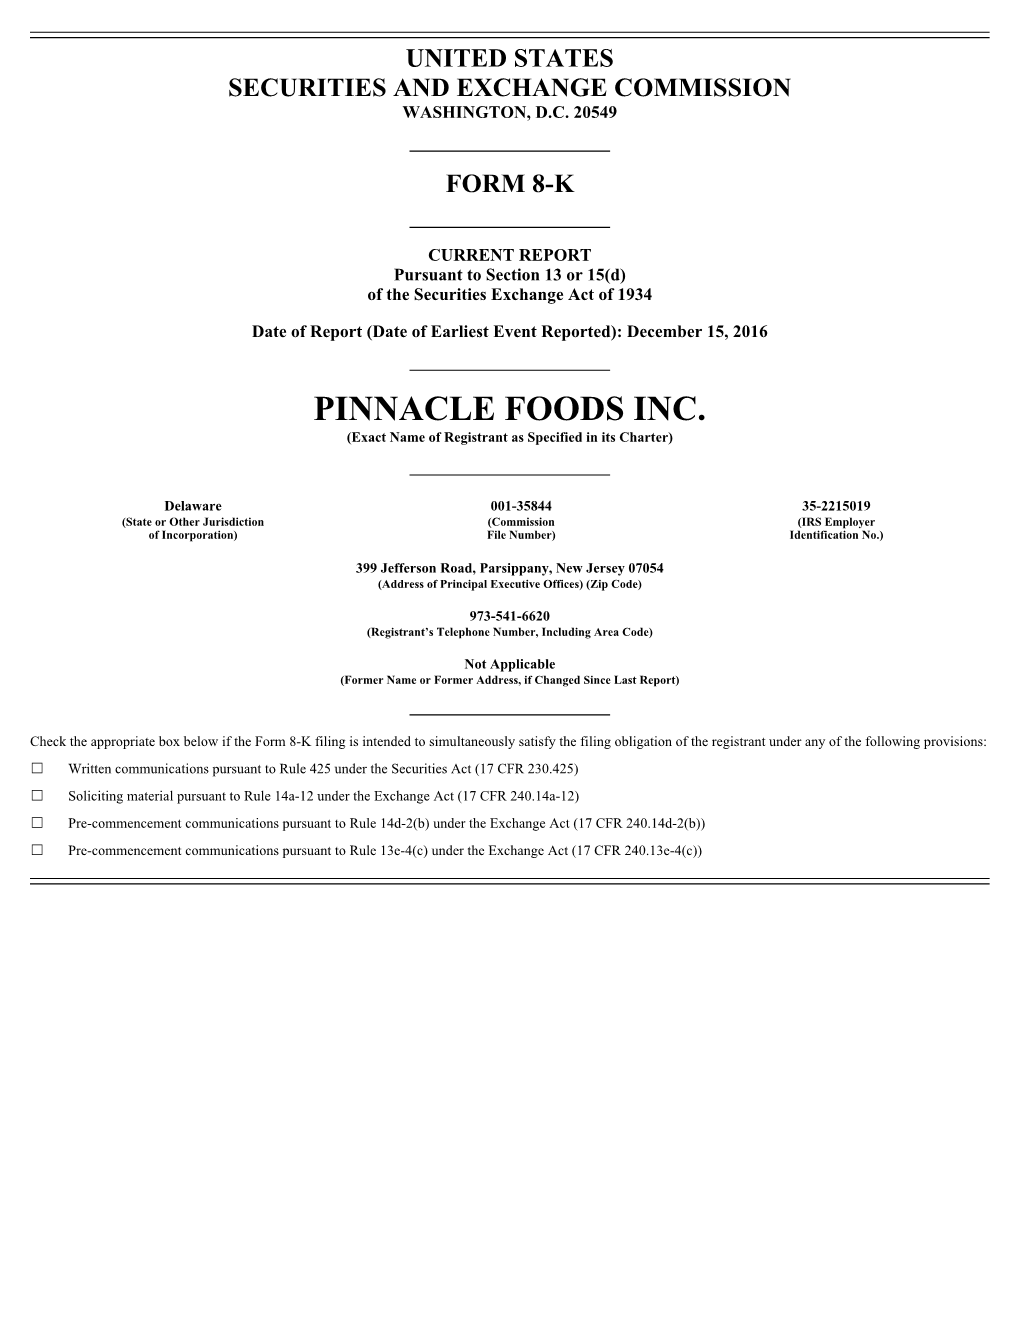 PINNACLE FOODS INC. (Exact Name of Registrant As Specified in Its Charter)